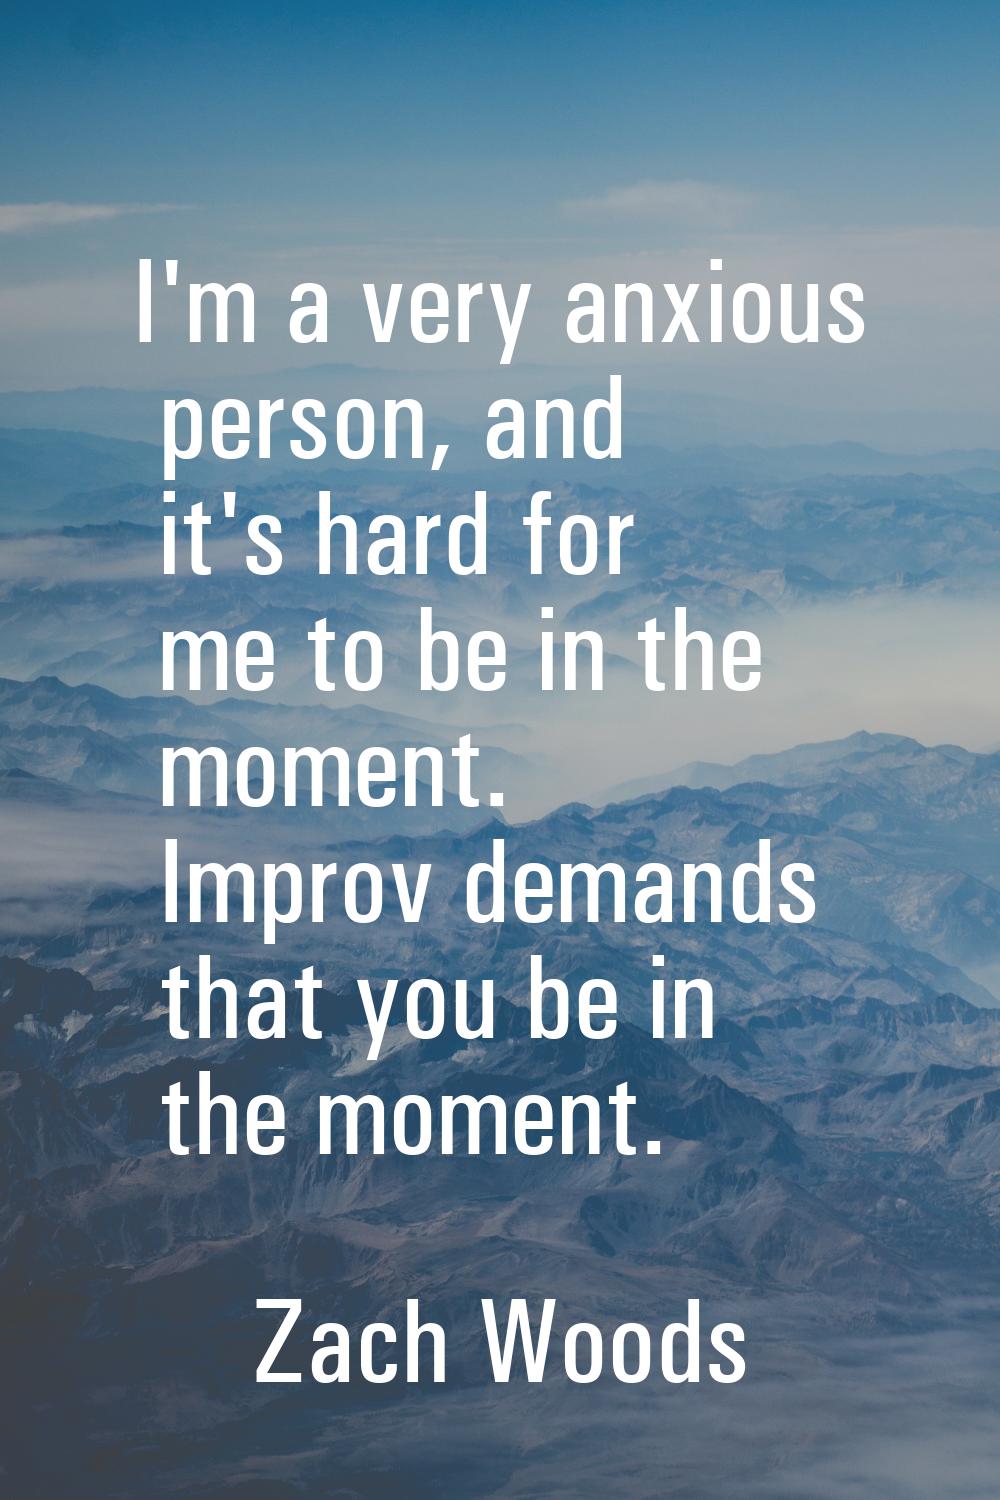 I'm a very anxious person, and it's hard for me to be in the moment. Improv demands that you be in 